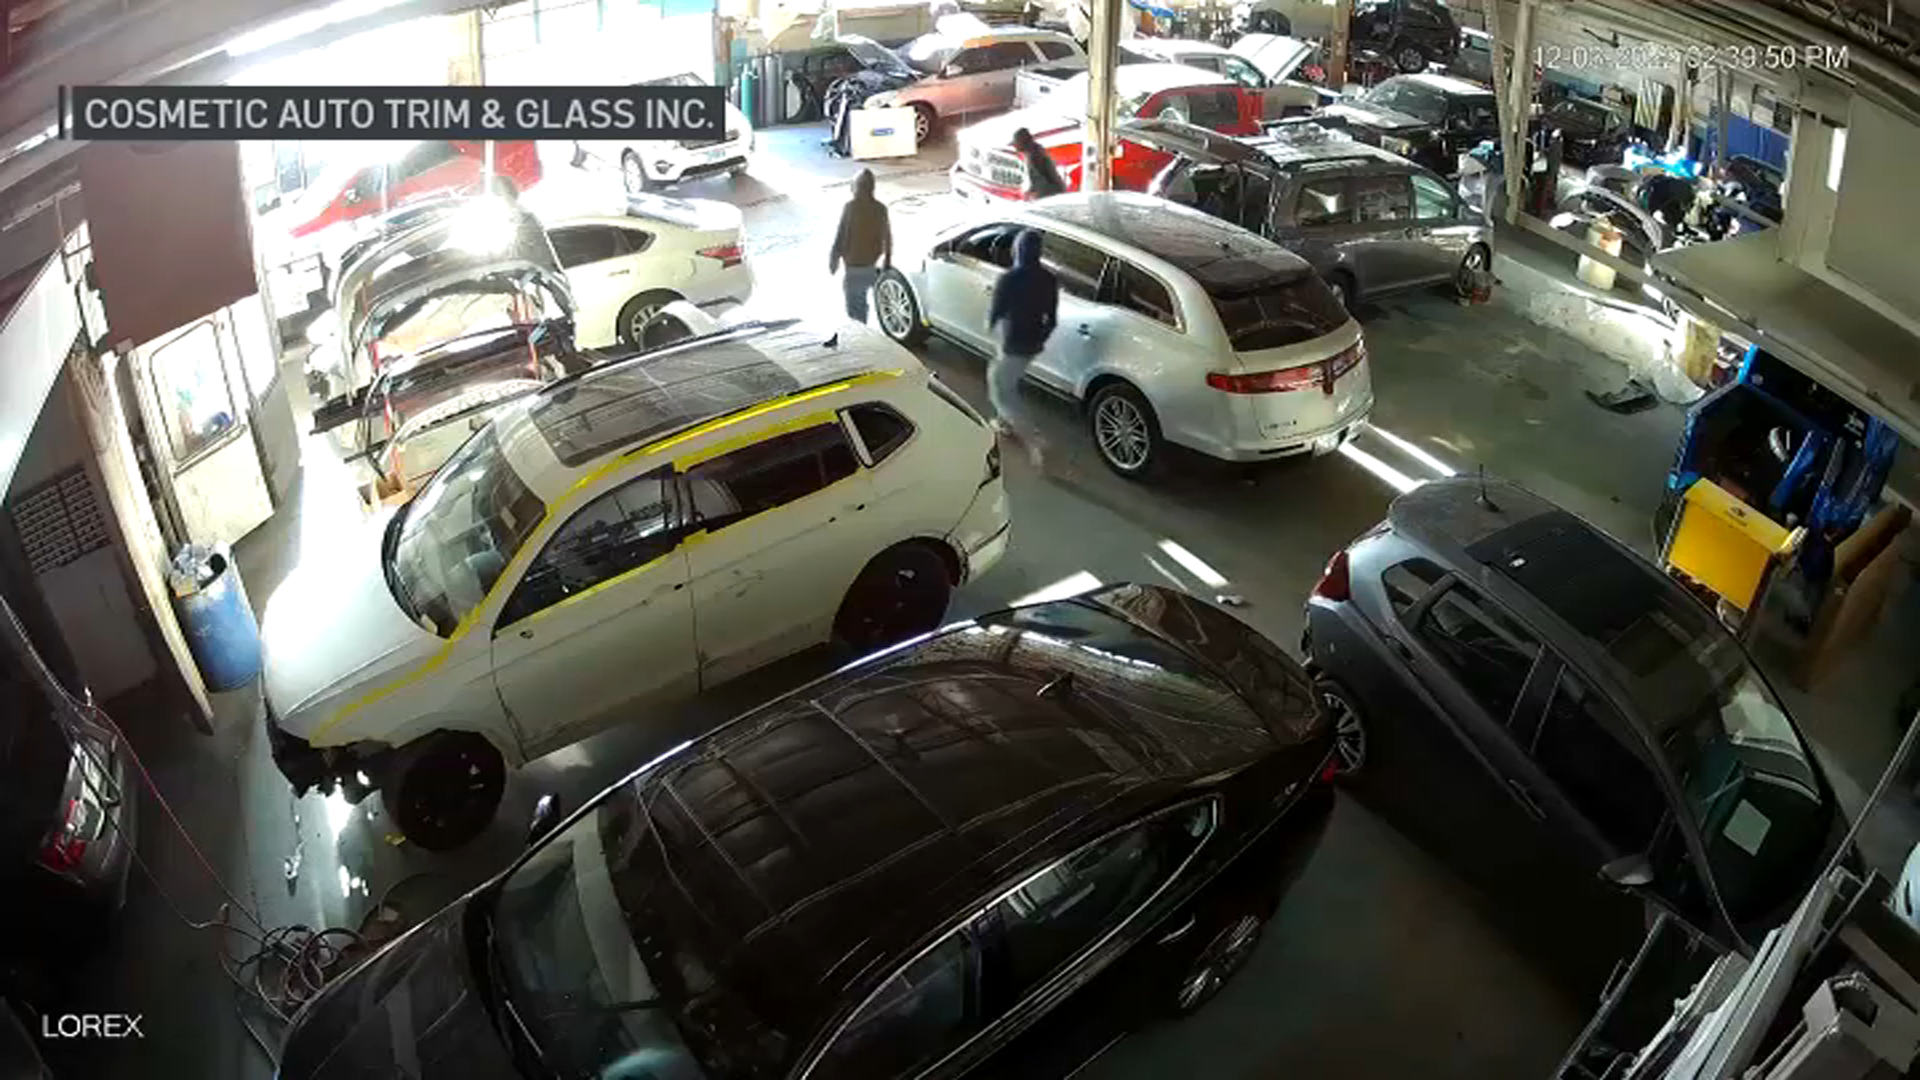 Thieves Steal 3 Vehicles From North Side Auto Body Shop, Surveillance Video Shows – NBC Chicago